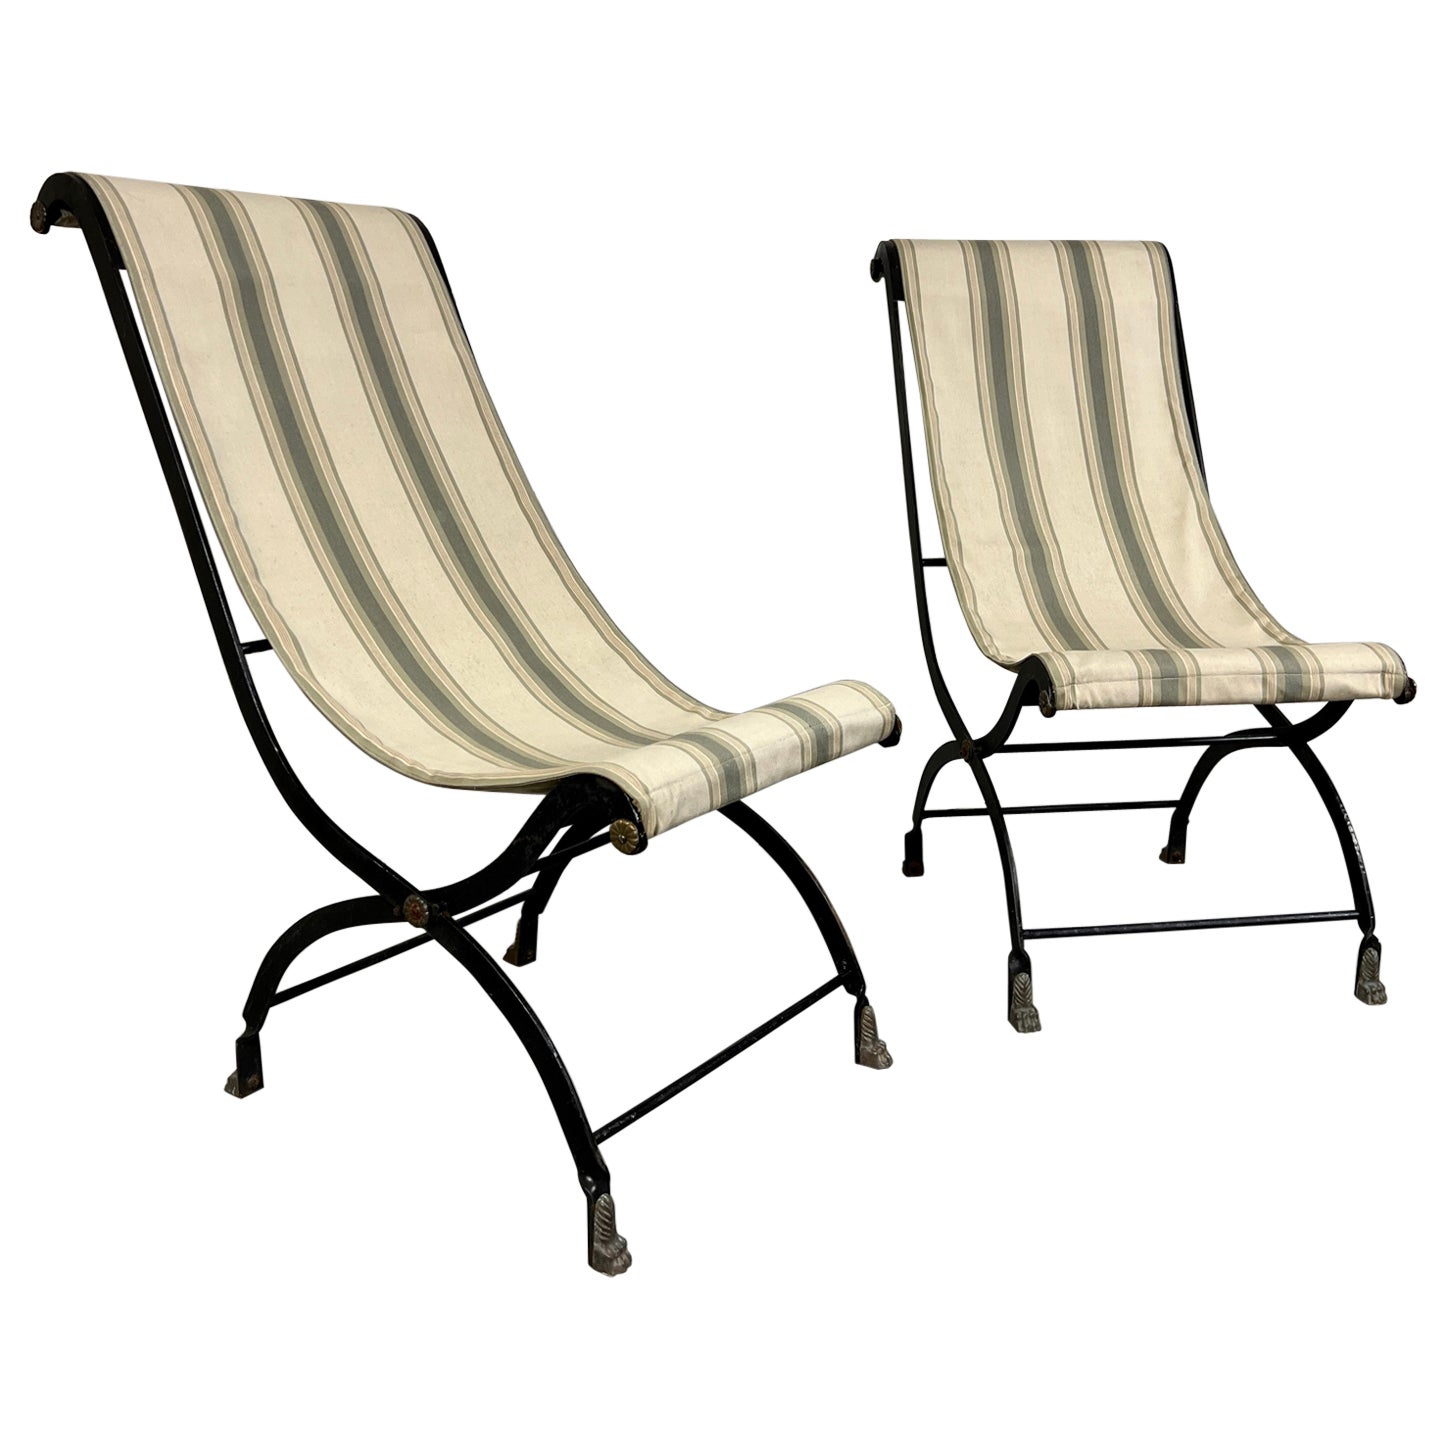 Vintage Iron Folding Sling Chairs 